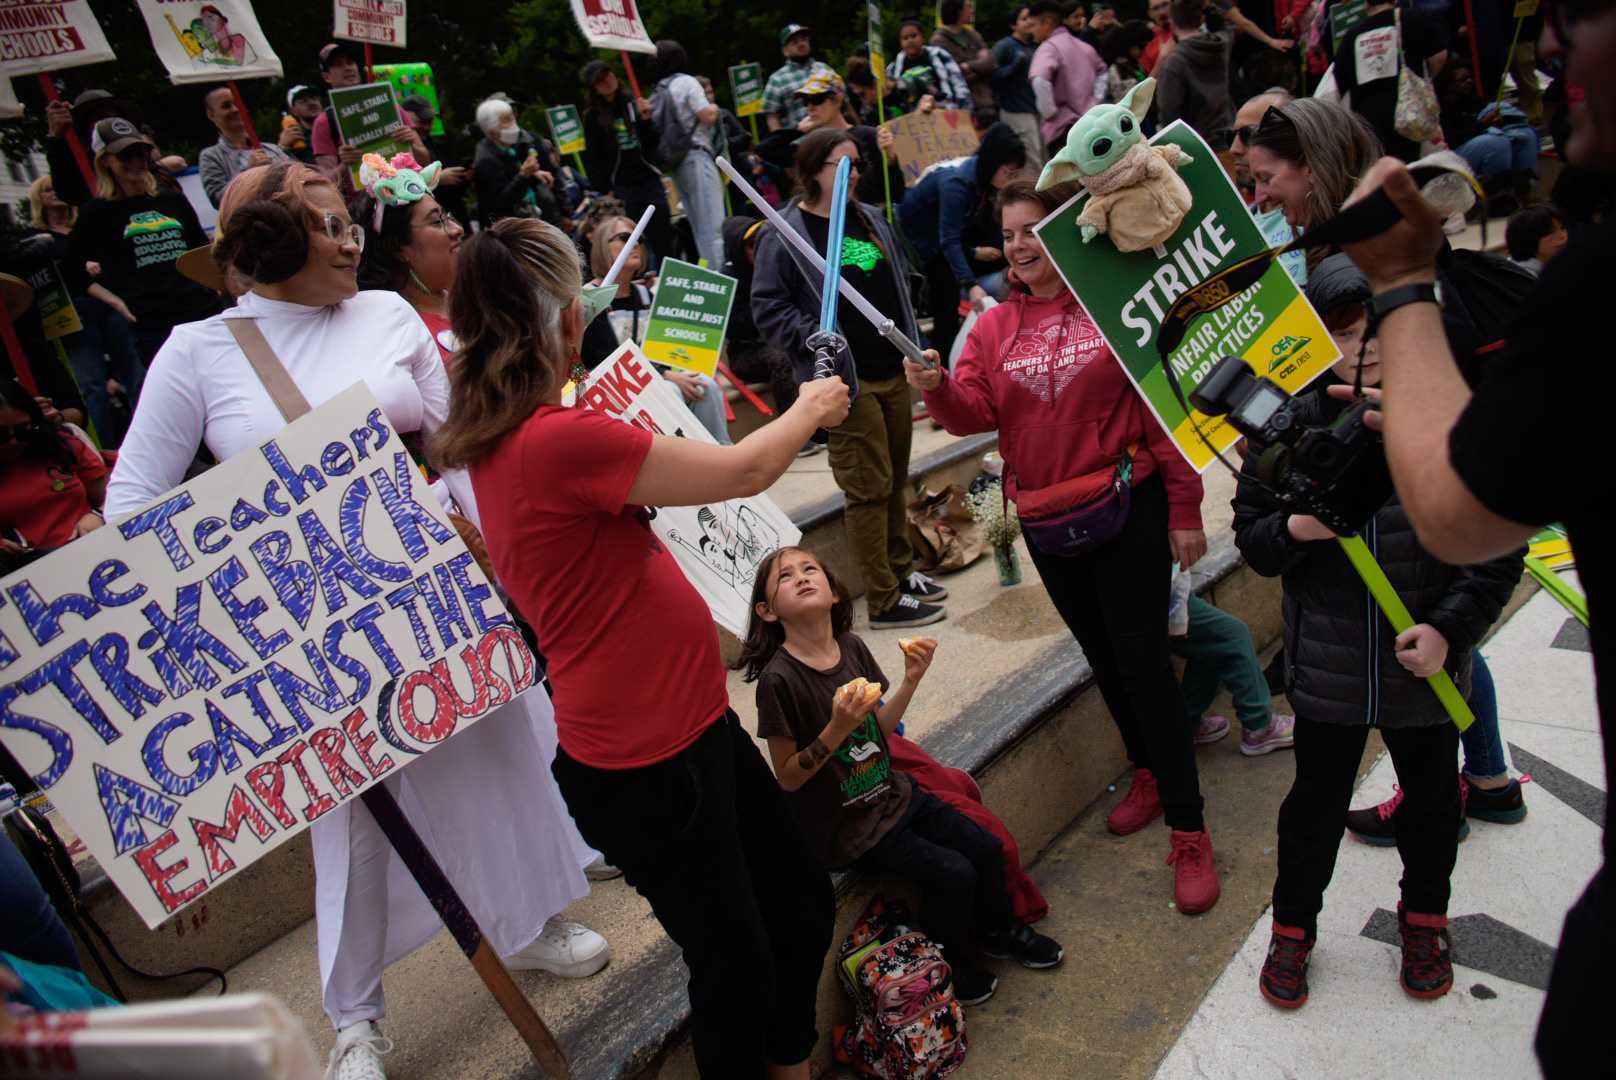 Protestors gather and hold signs, with two female protestors engaged in a mock sword fight.